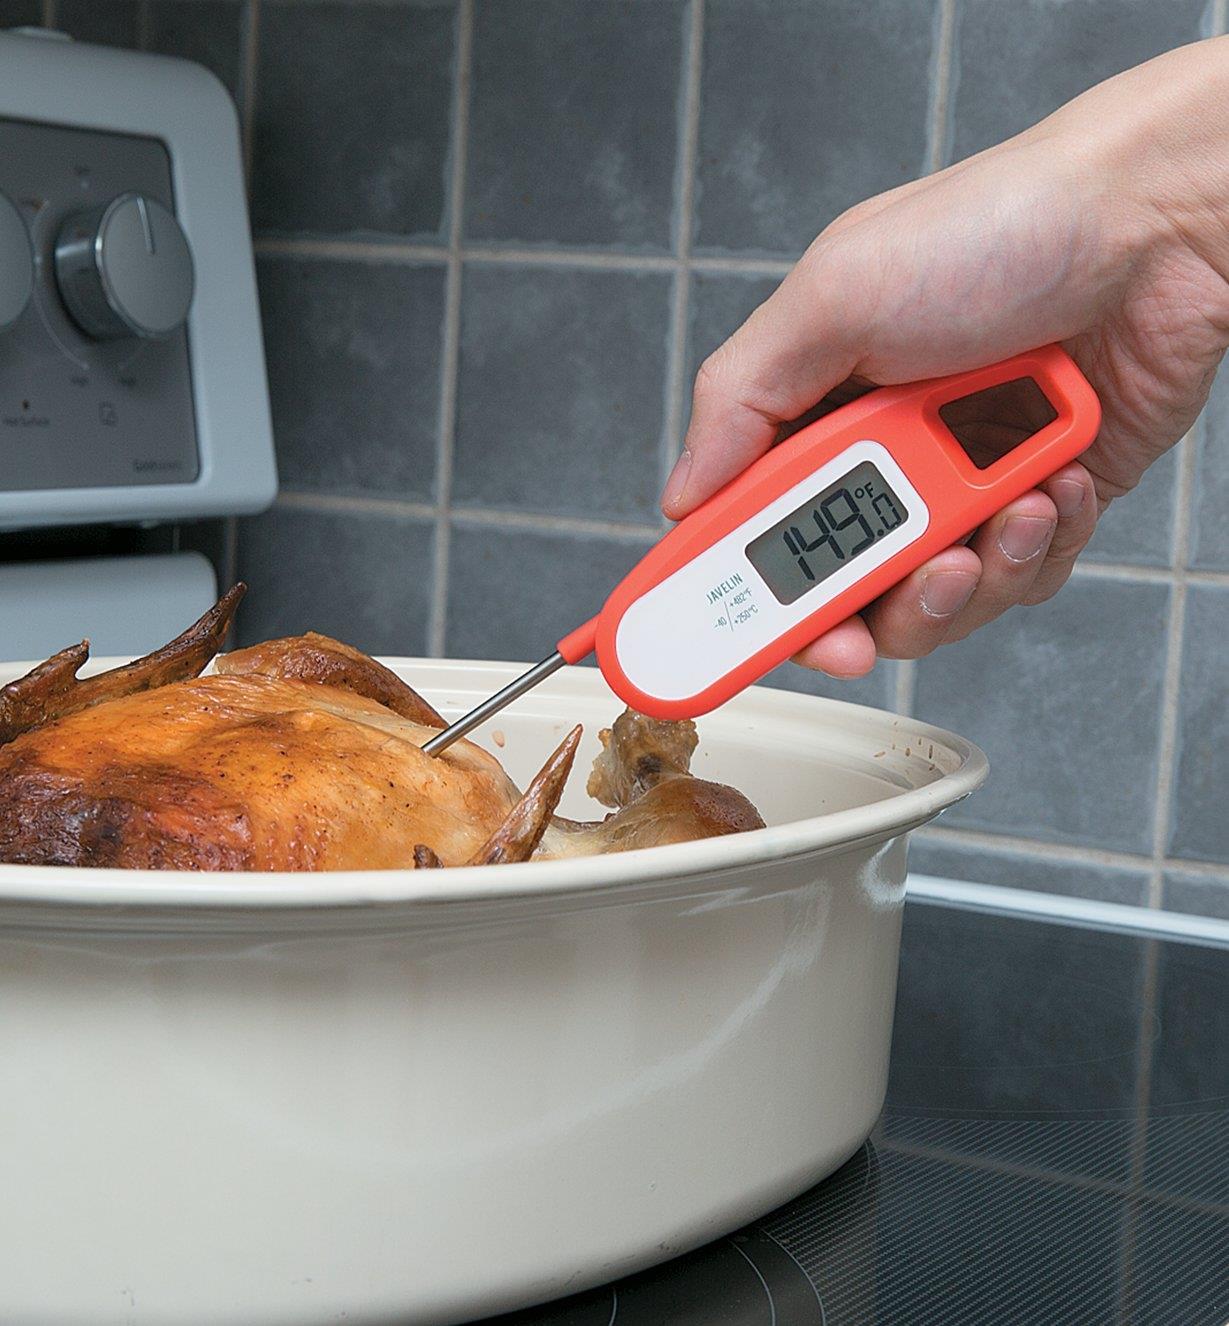 Inserting the Javelin Instant-Read Thermometer into a cooked chicken in a baking dish